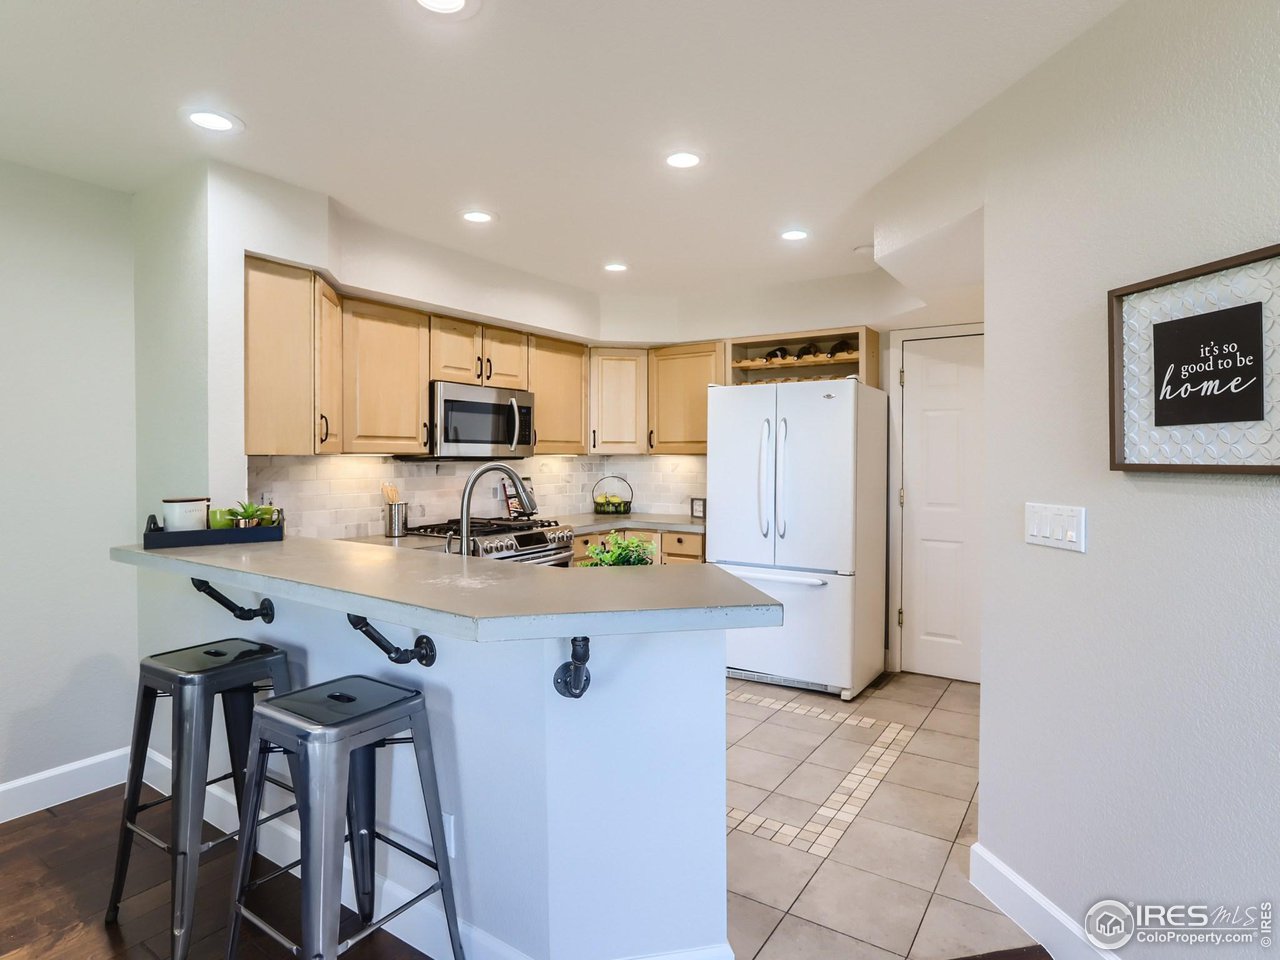 Gas stove, concrete counters and huge walk in pantry makes this kitchen spacious and workable.